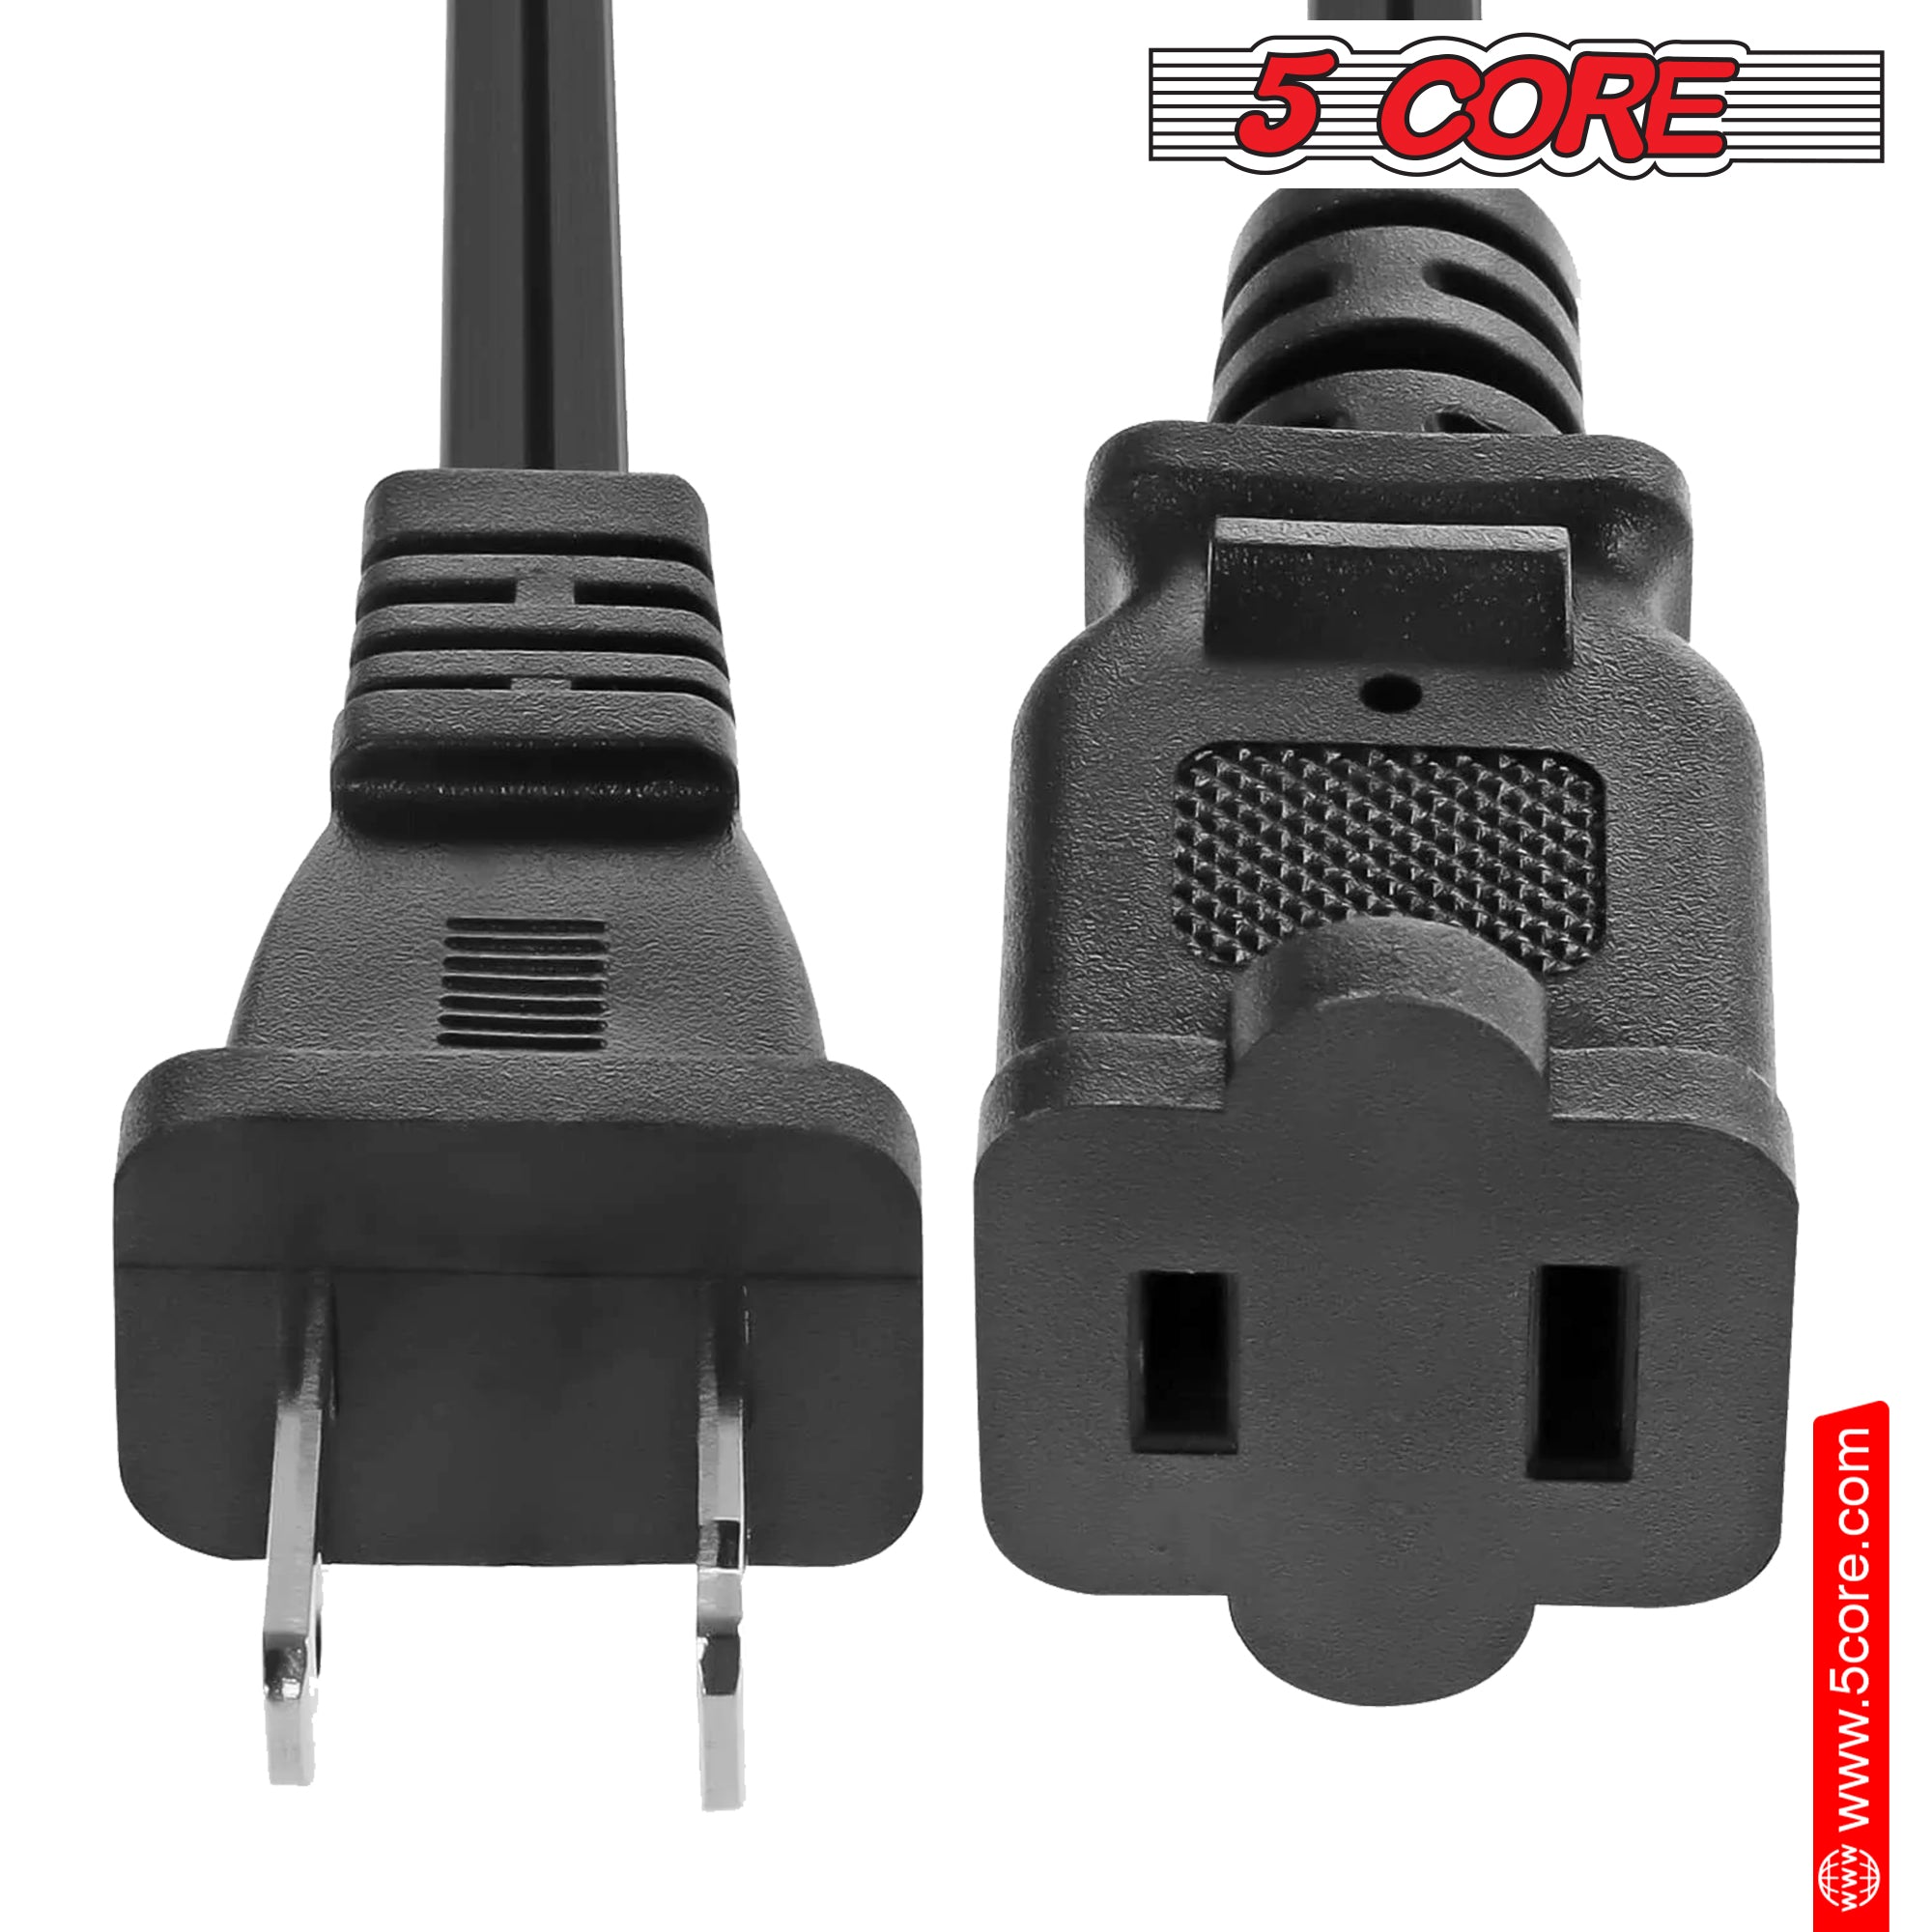 Buy DC Jack Connector with Wire Online at the Best Price